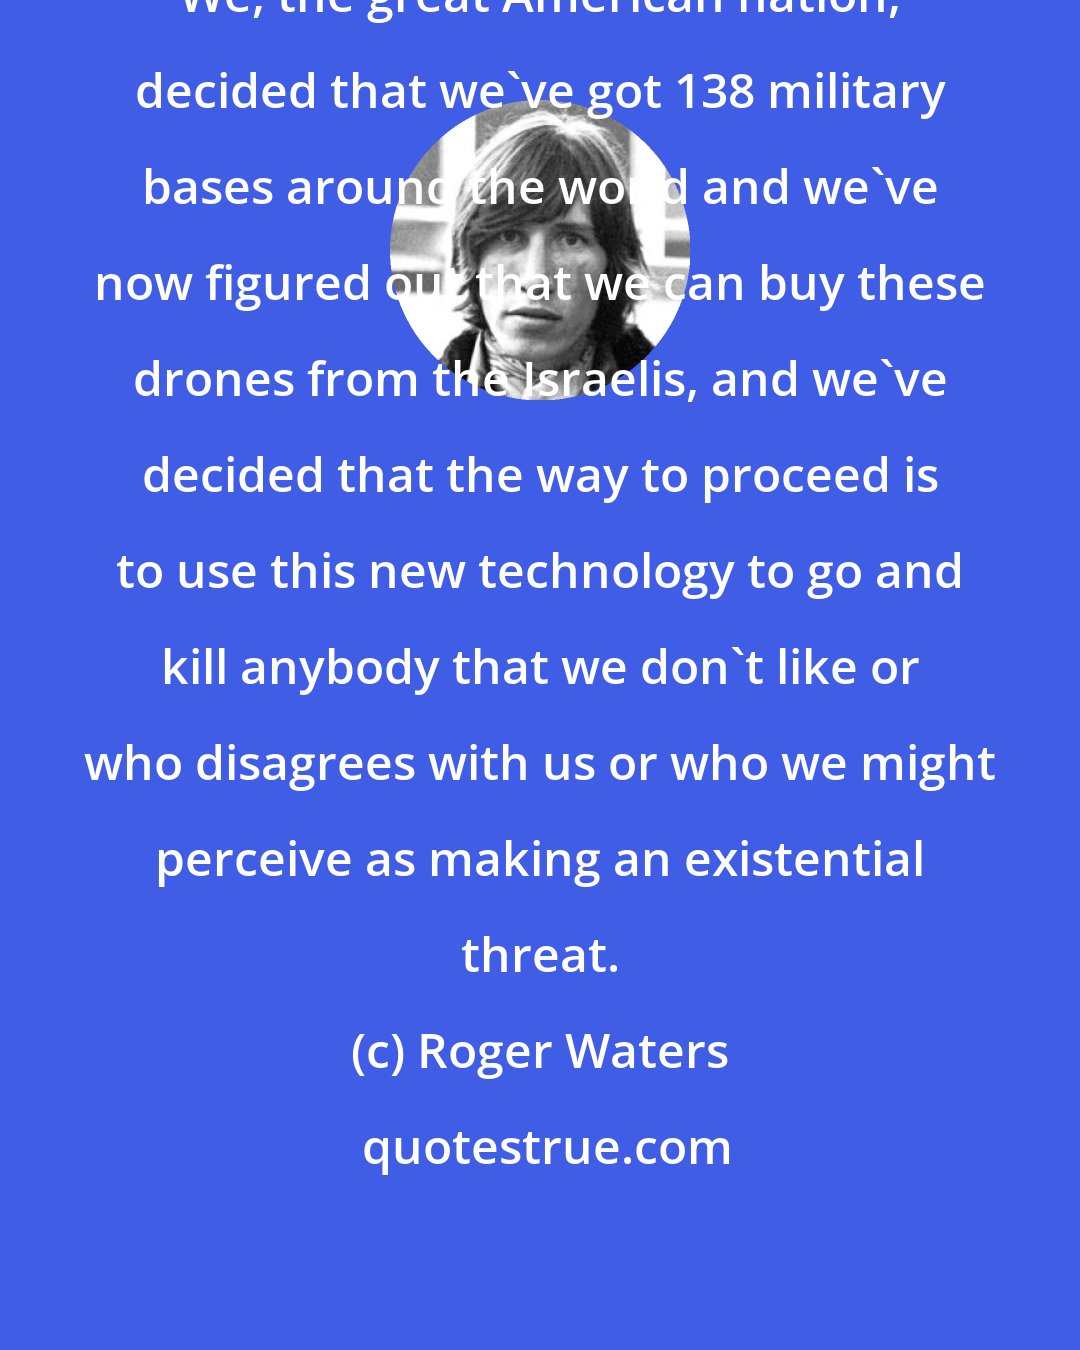 Roger Waters: We, the great American nation, decided that we've got 138 military bases around the world and we've now figured out that we can buy these drones from the Israelis, and we've decided that the way to proceed is to use this new technology to go and kill anybody that we don't like or who disagrees with us or who we might perceive as making an existential threat.